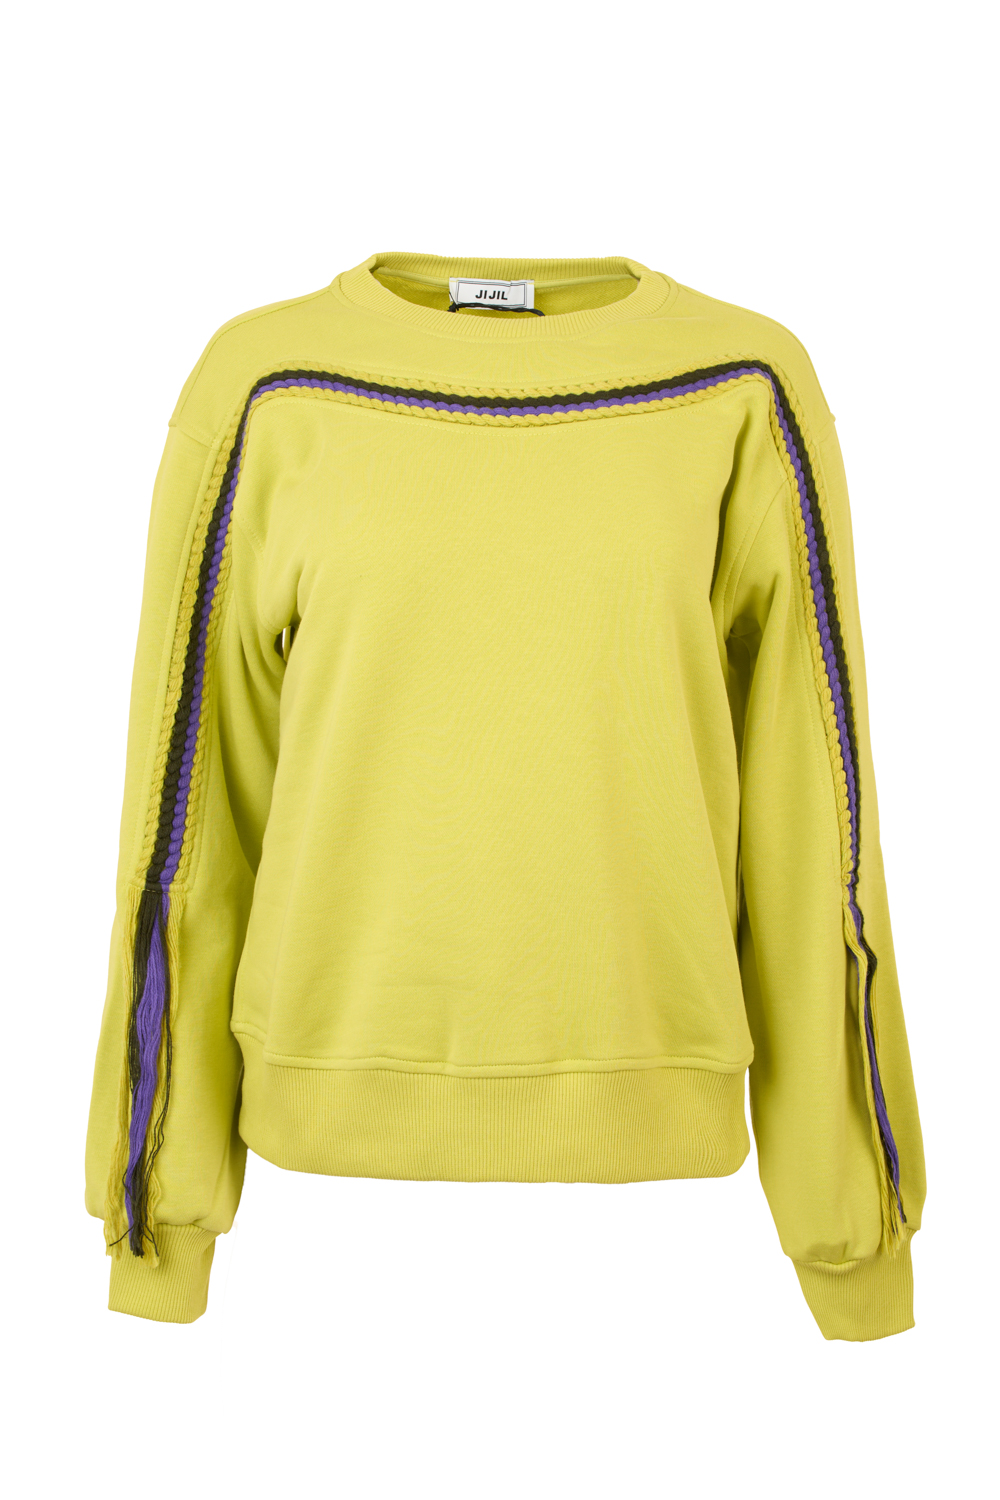 Sweatshirt with Multicolour Cord and Fringe Detail (Jijil)